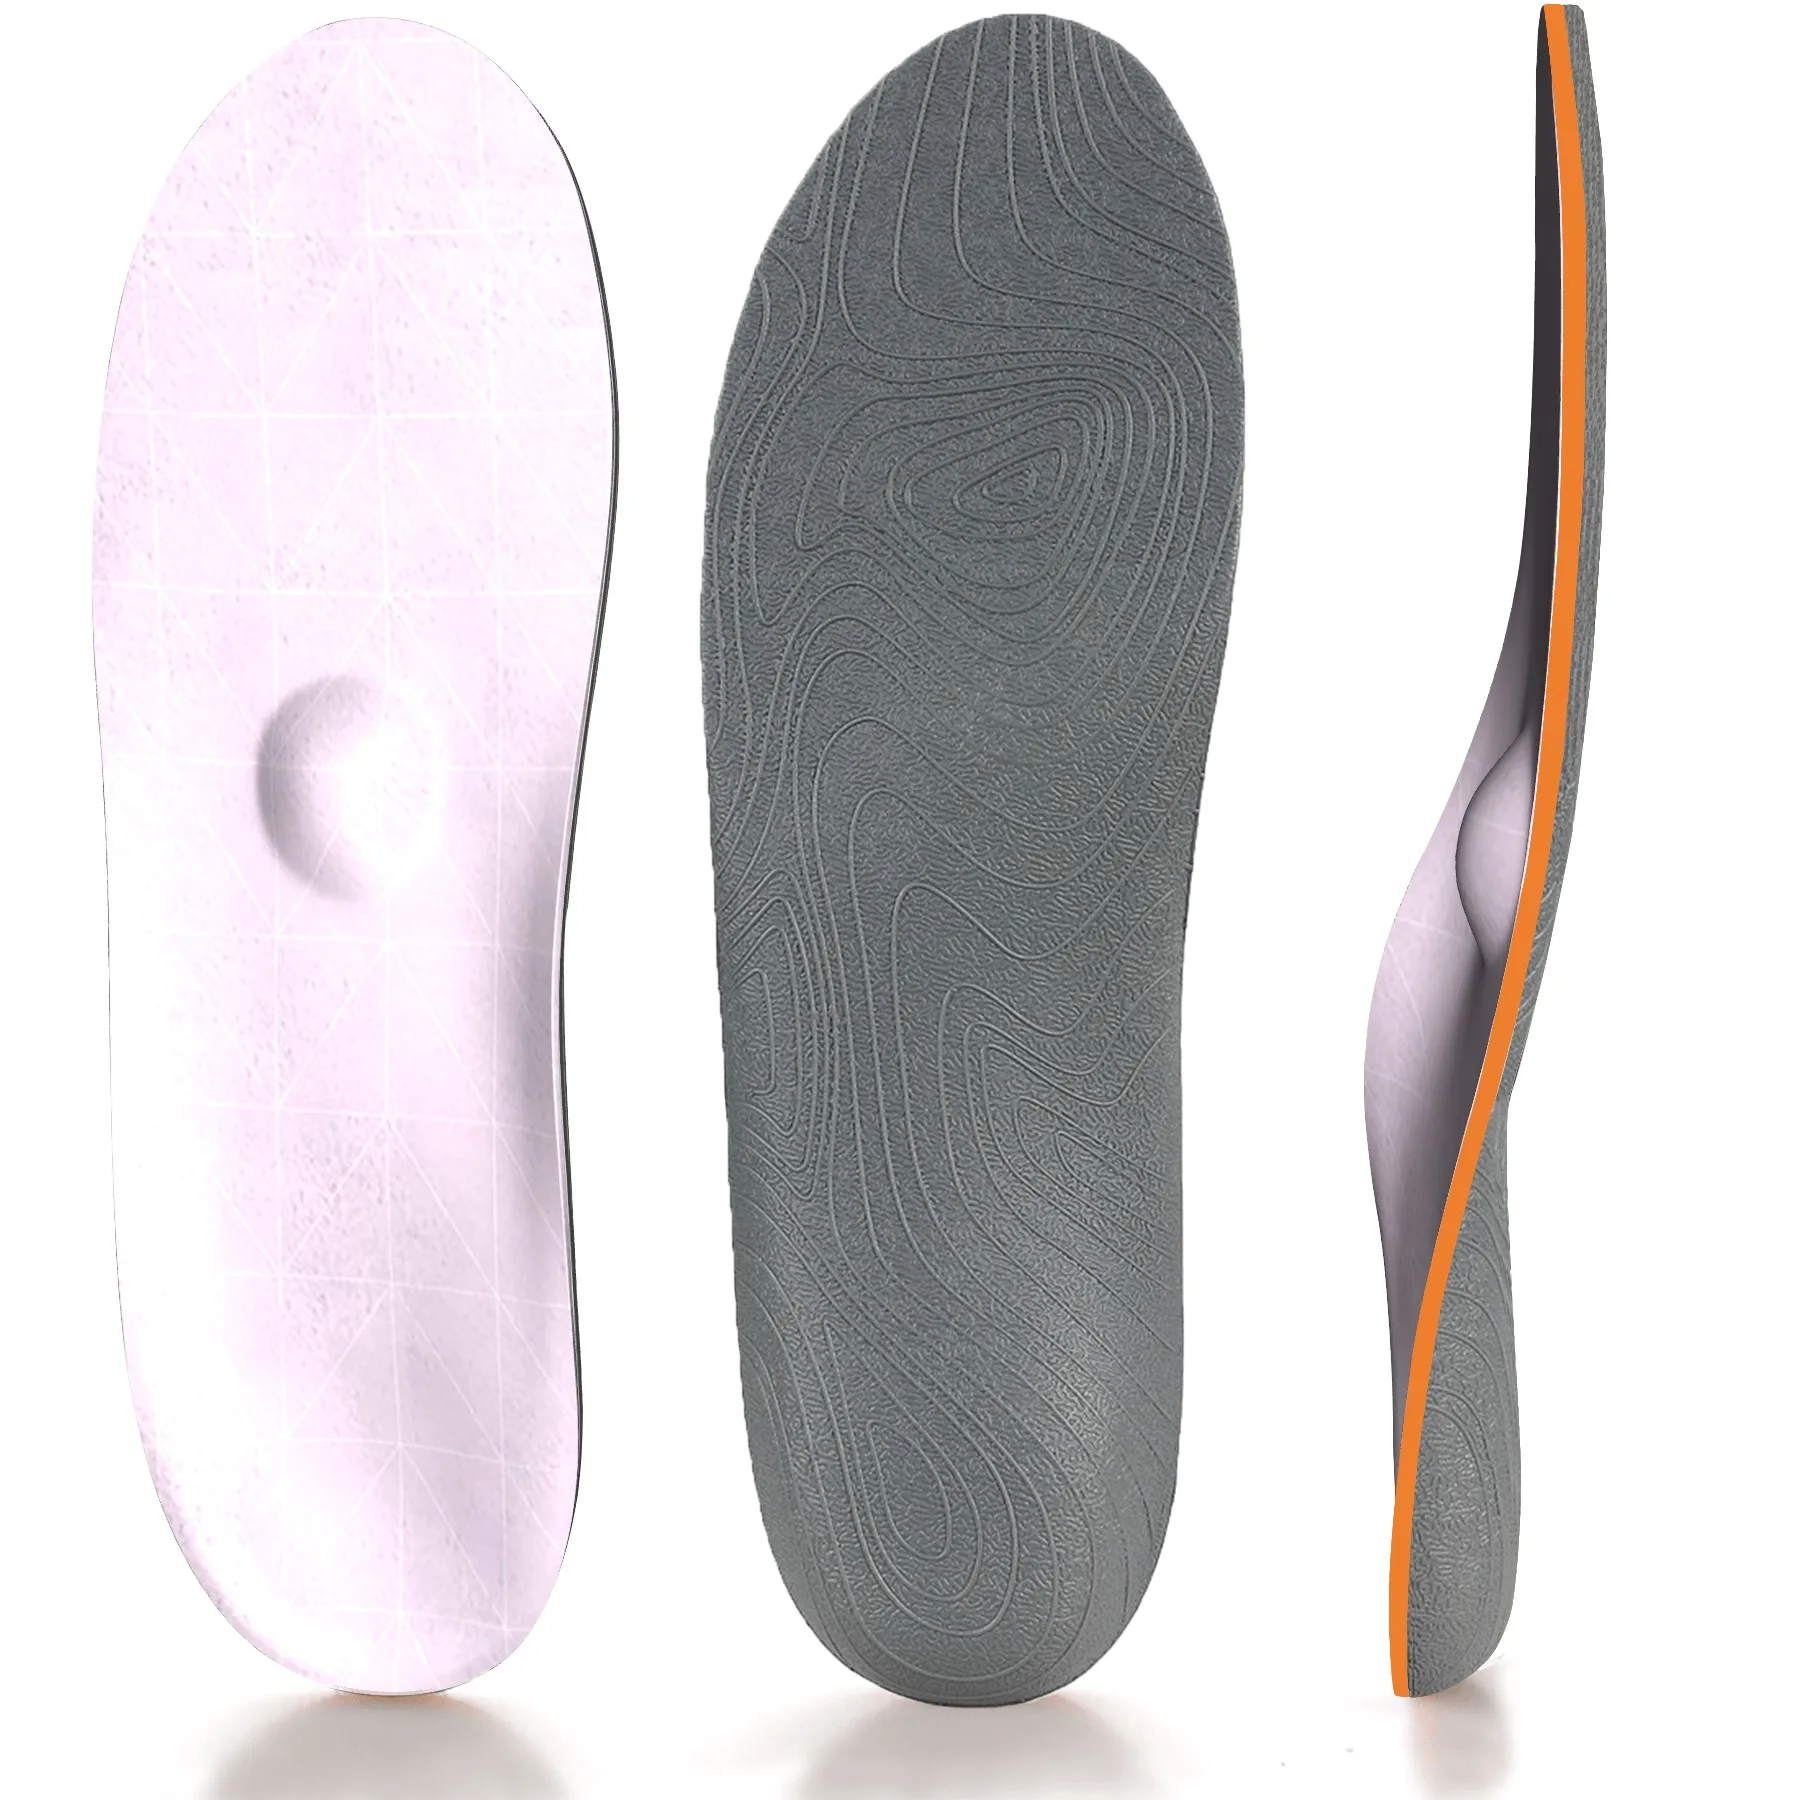 Flat Feet Orthopedic Insert Insoles Sneakers Memory Foam Arch Support Men Heel Pain Spurs Plantar Fasciitis Sports Shoes Cushion